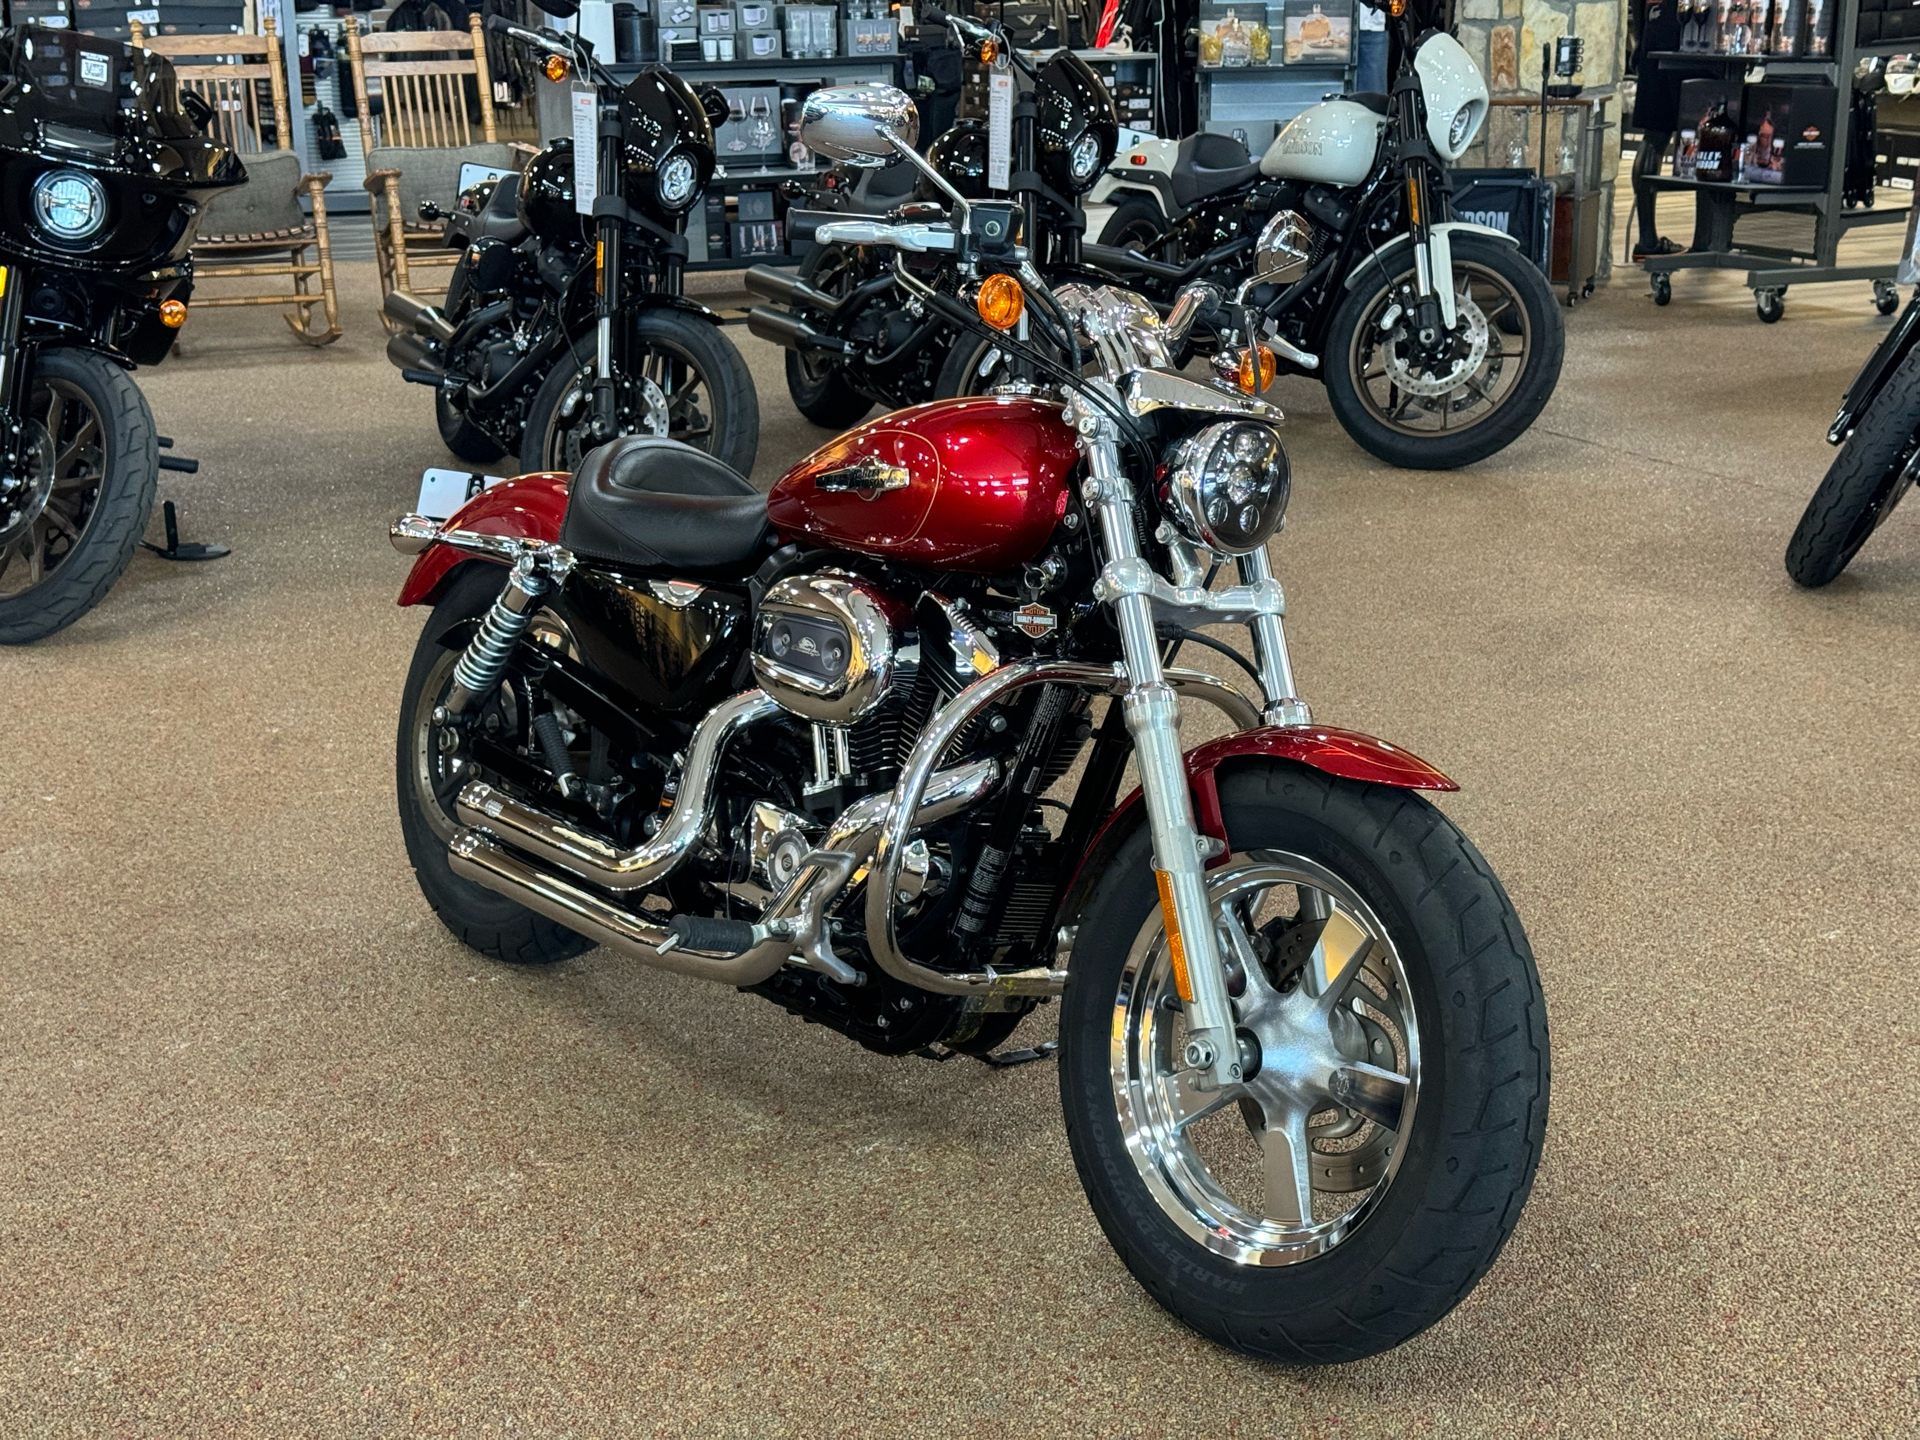 2013 Harley-Davidson Sportster® 1200 Custom in Knoxville, Tennessee - Photo 2